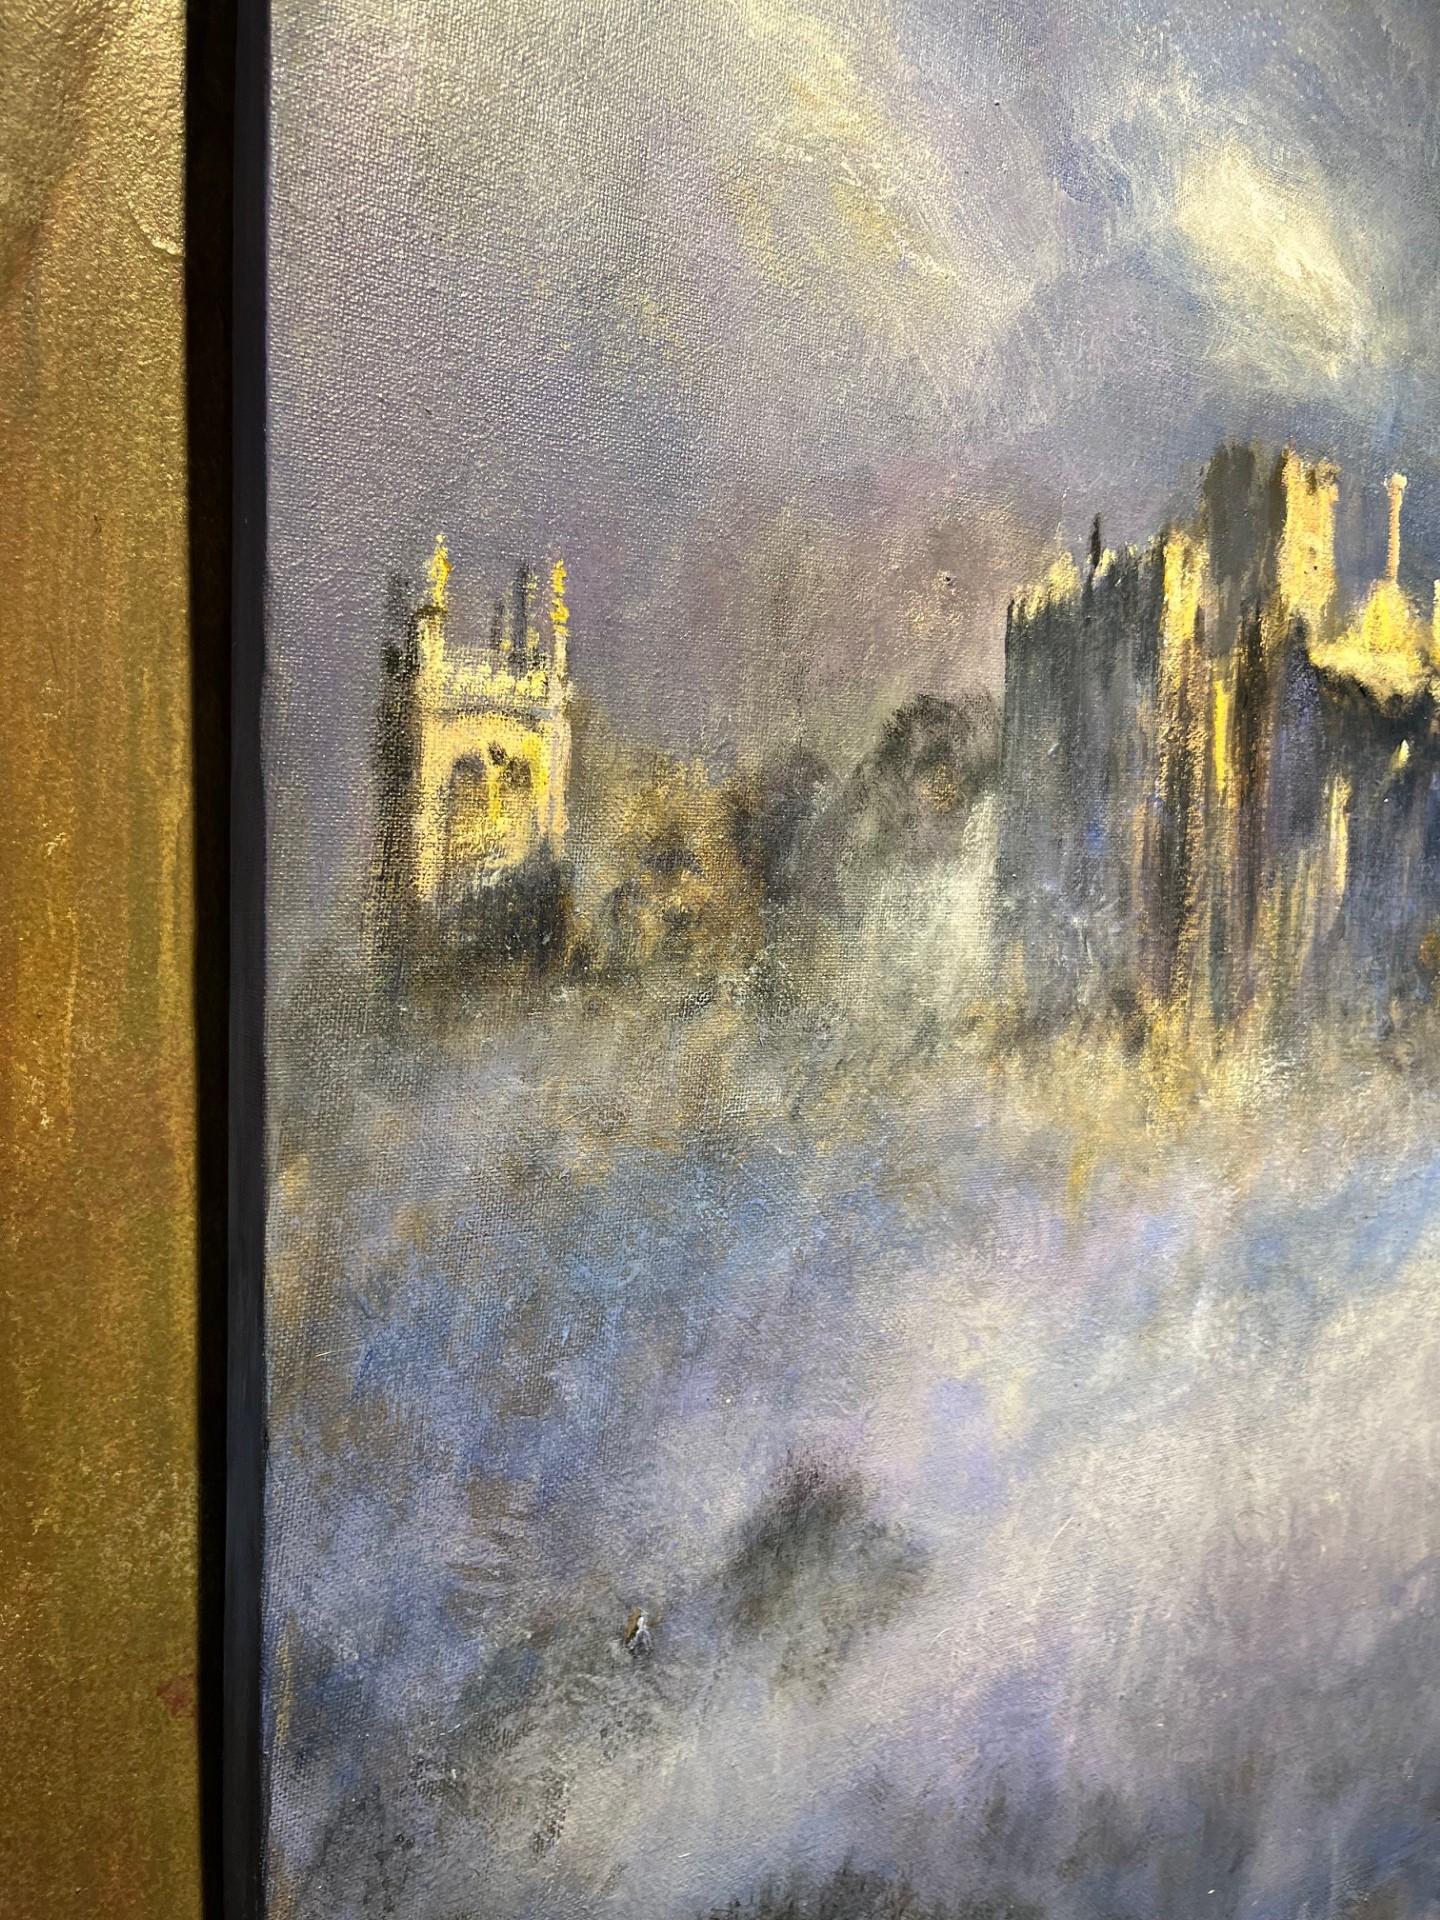 Large Oil of Ludlow Castle, Shropshire misty scene, stormy sky church in view - Painting by Rene Legrand